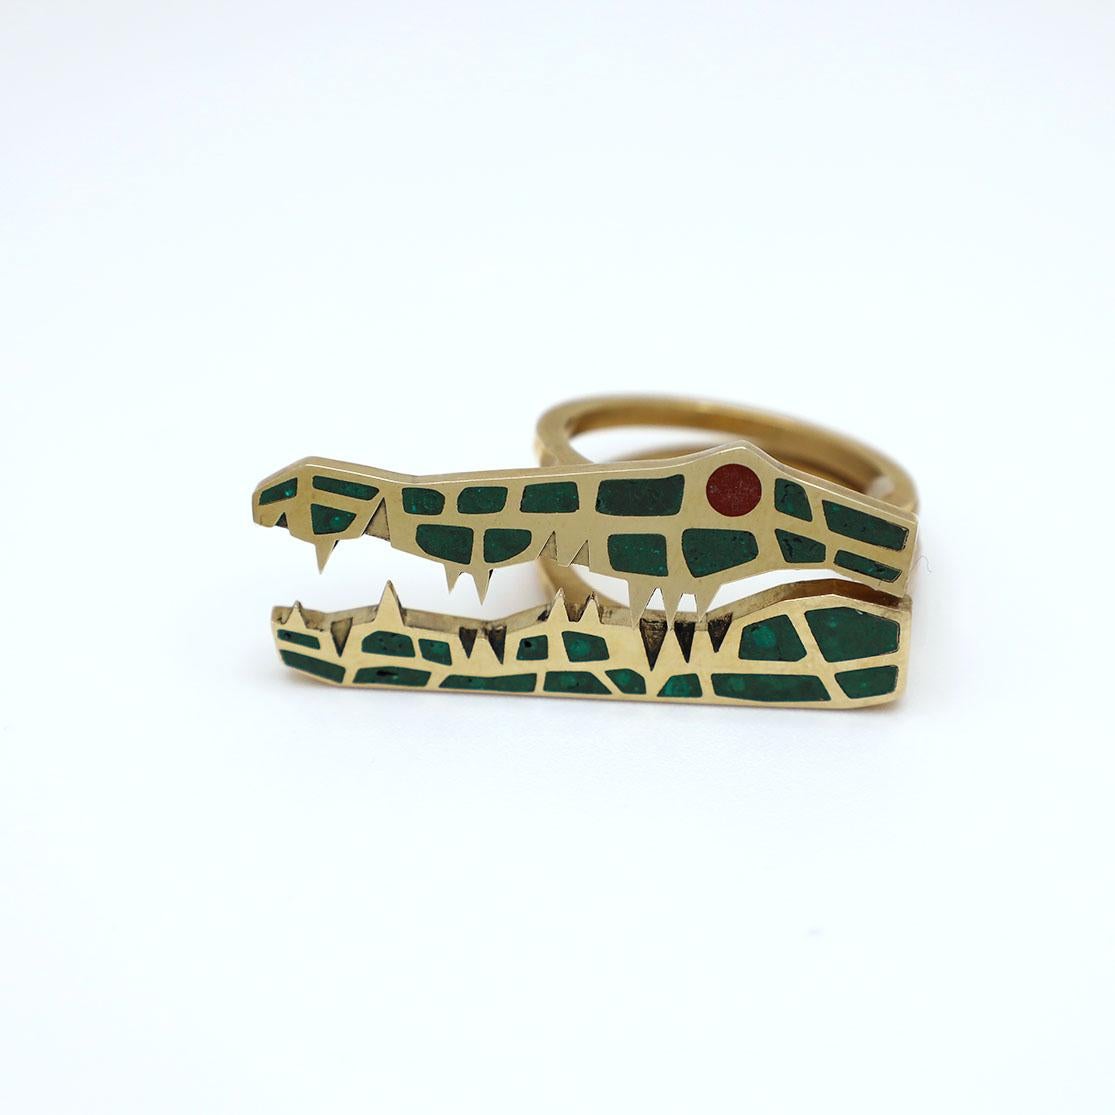 Gold Crocodile Ring with Malachite Inlay by KRSN Studio

This contemporary piece reinterprets the stackable ring. Made of 10K yellow gold, the piece consists of two individual rings, which interlock to form the profile of a crocodile. When slid